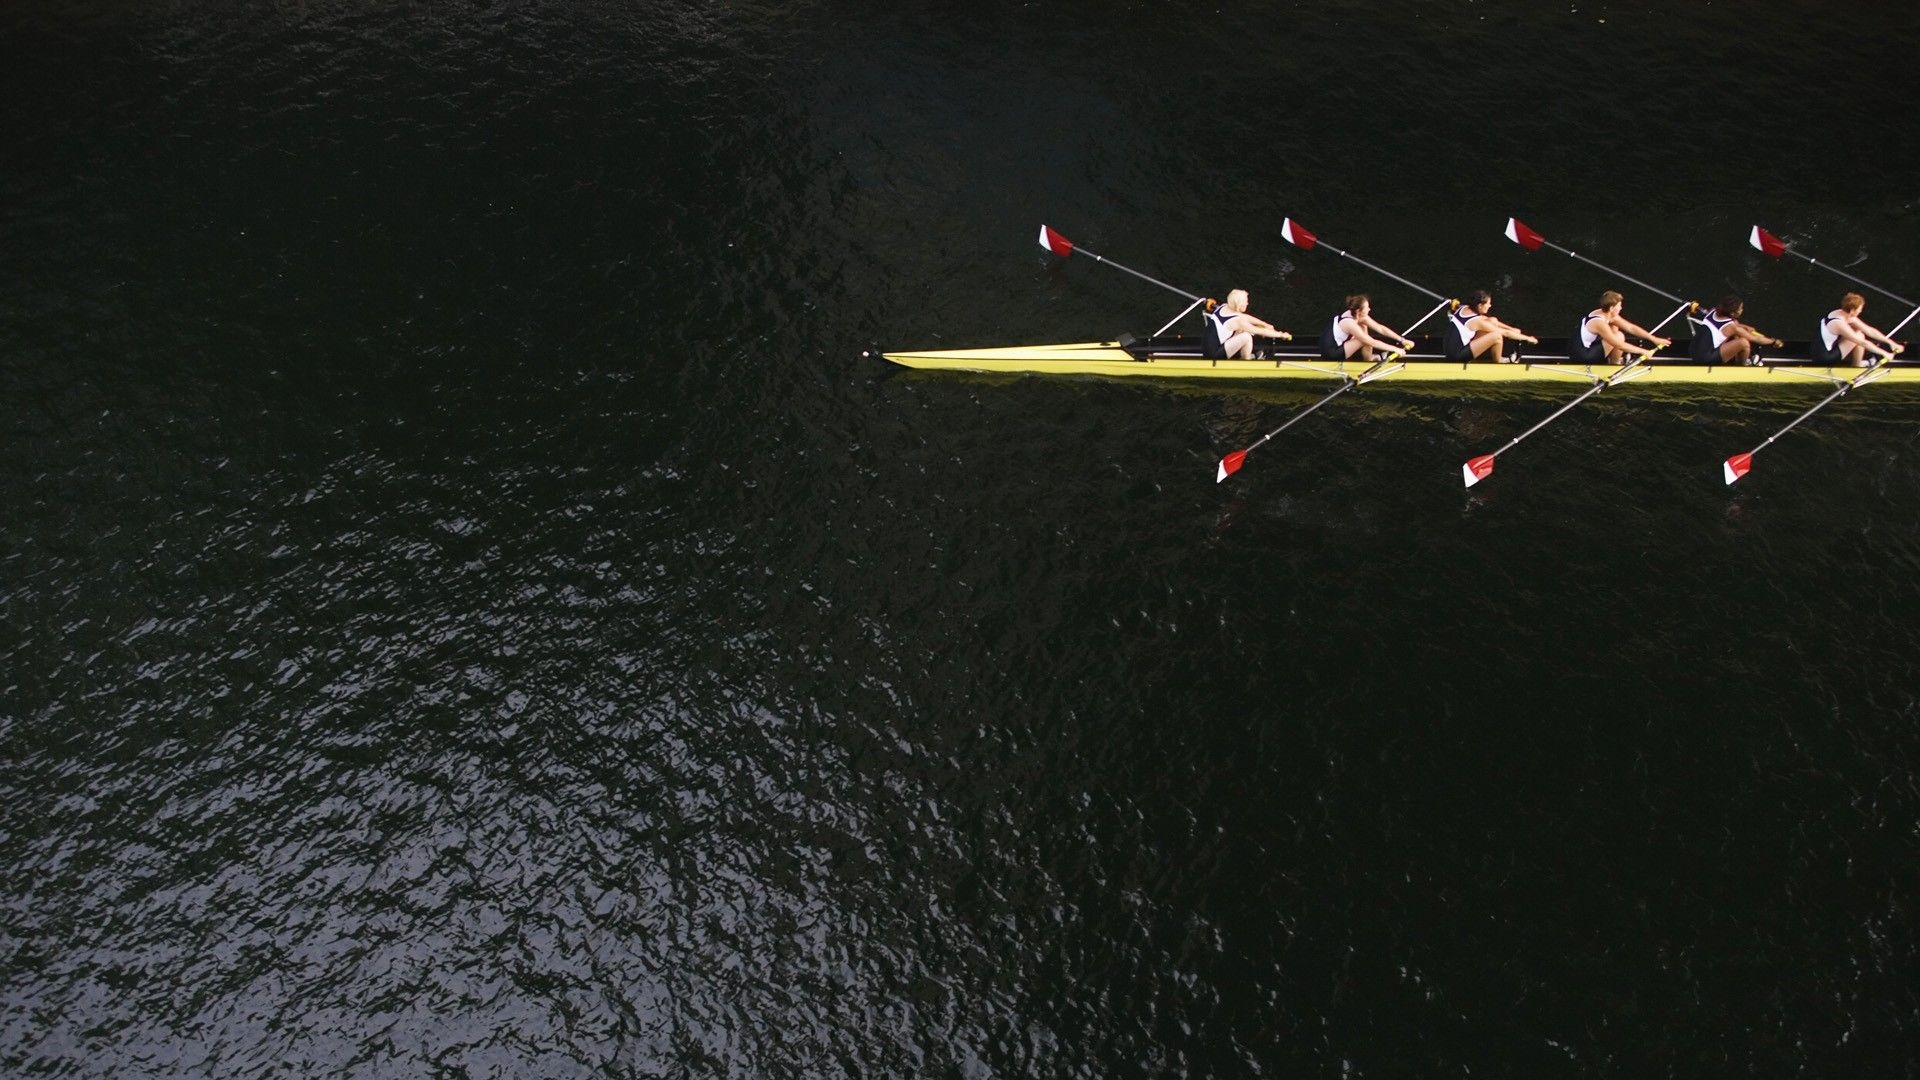 Rowing: The sport of racing boats using oars, The sweep-pulling competitive event. 1920x1080 Full HD Background.